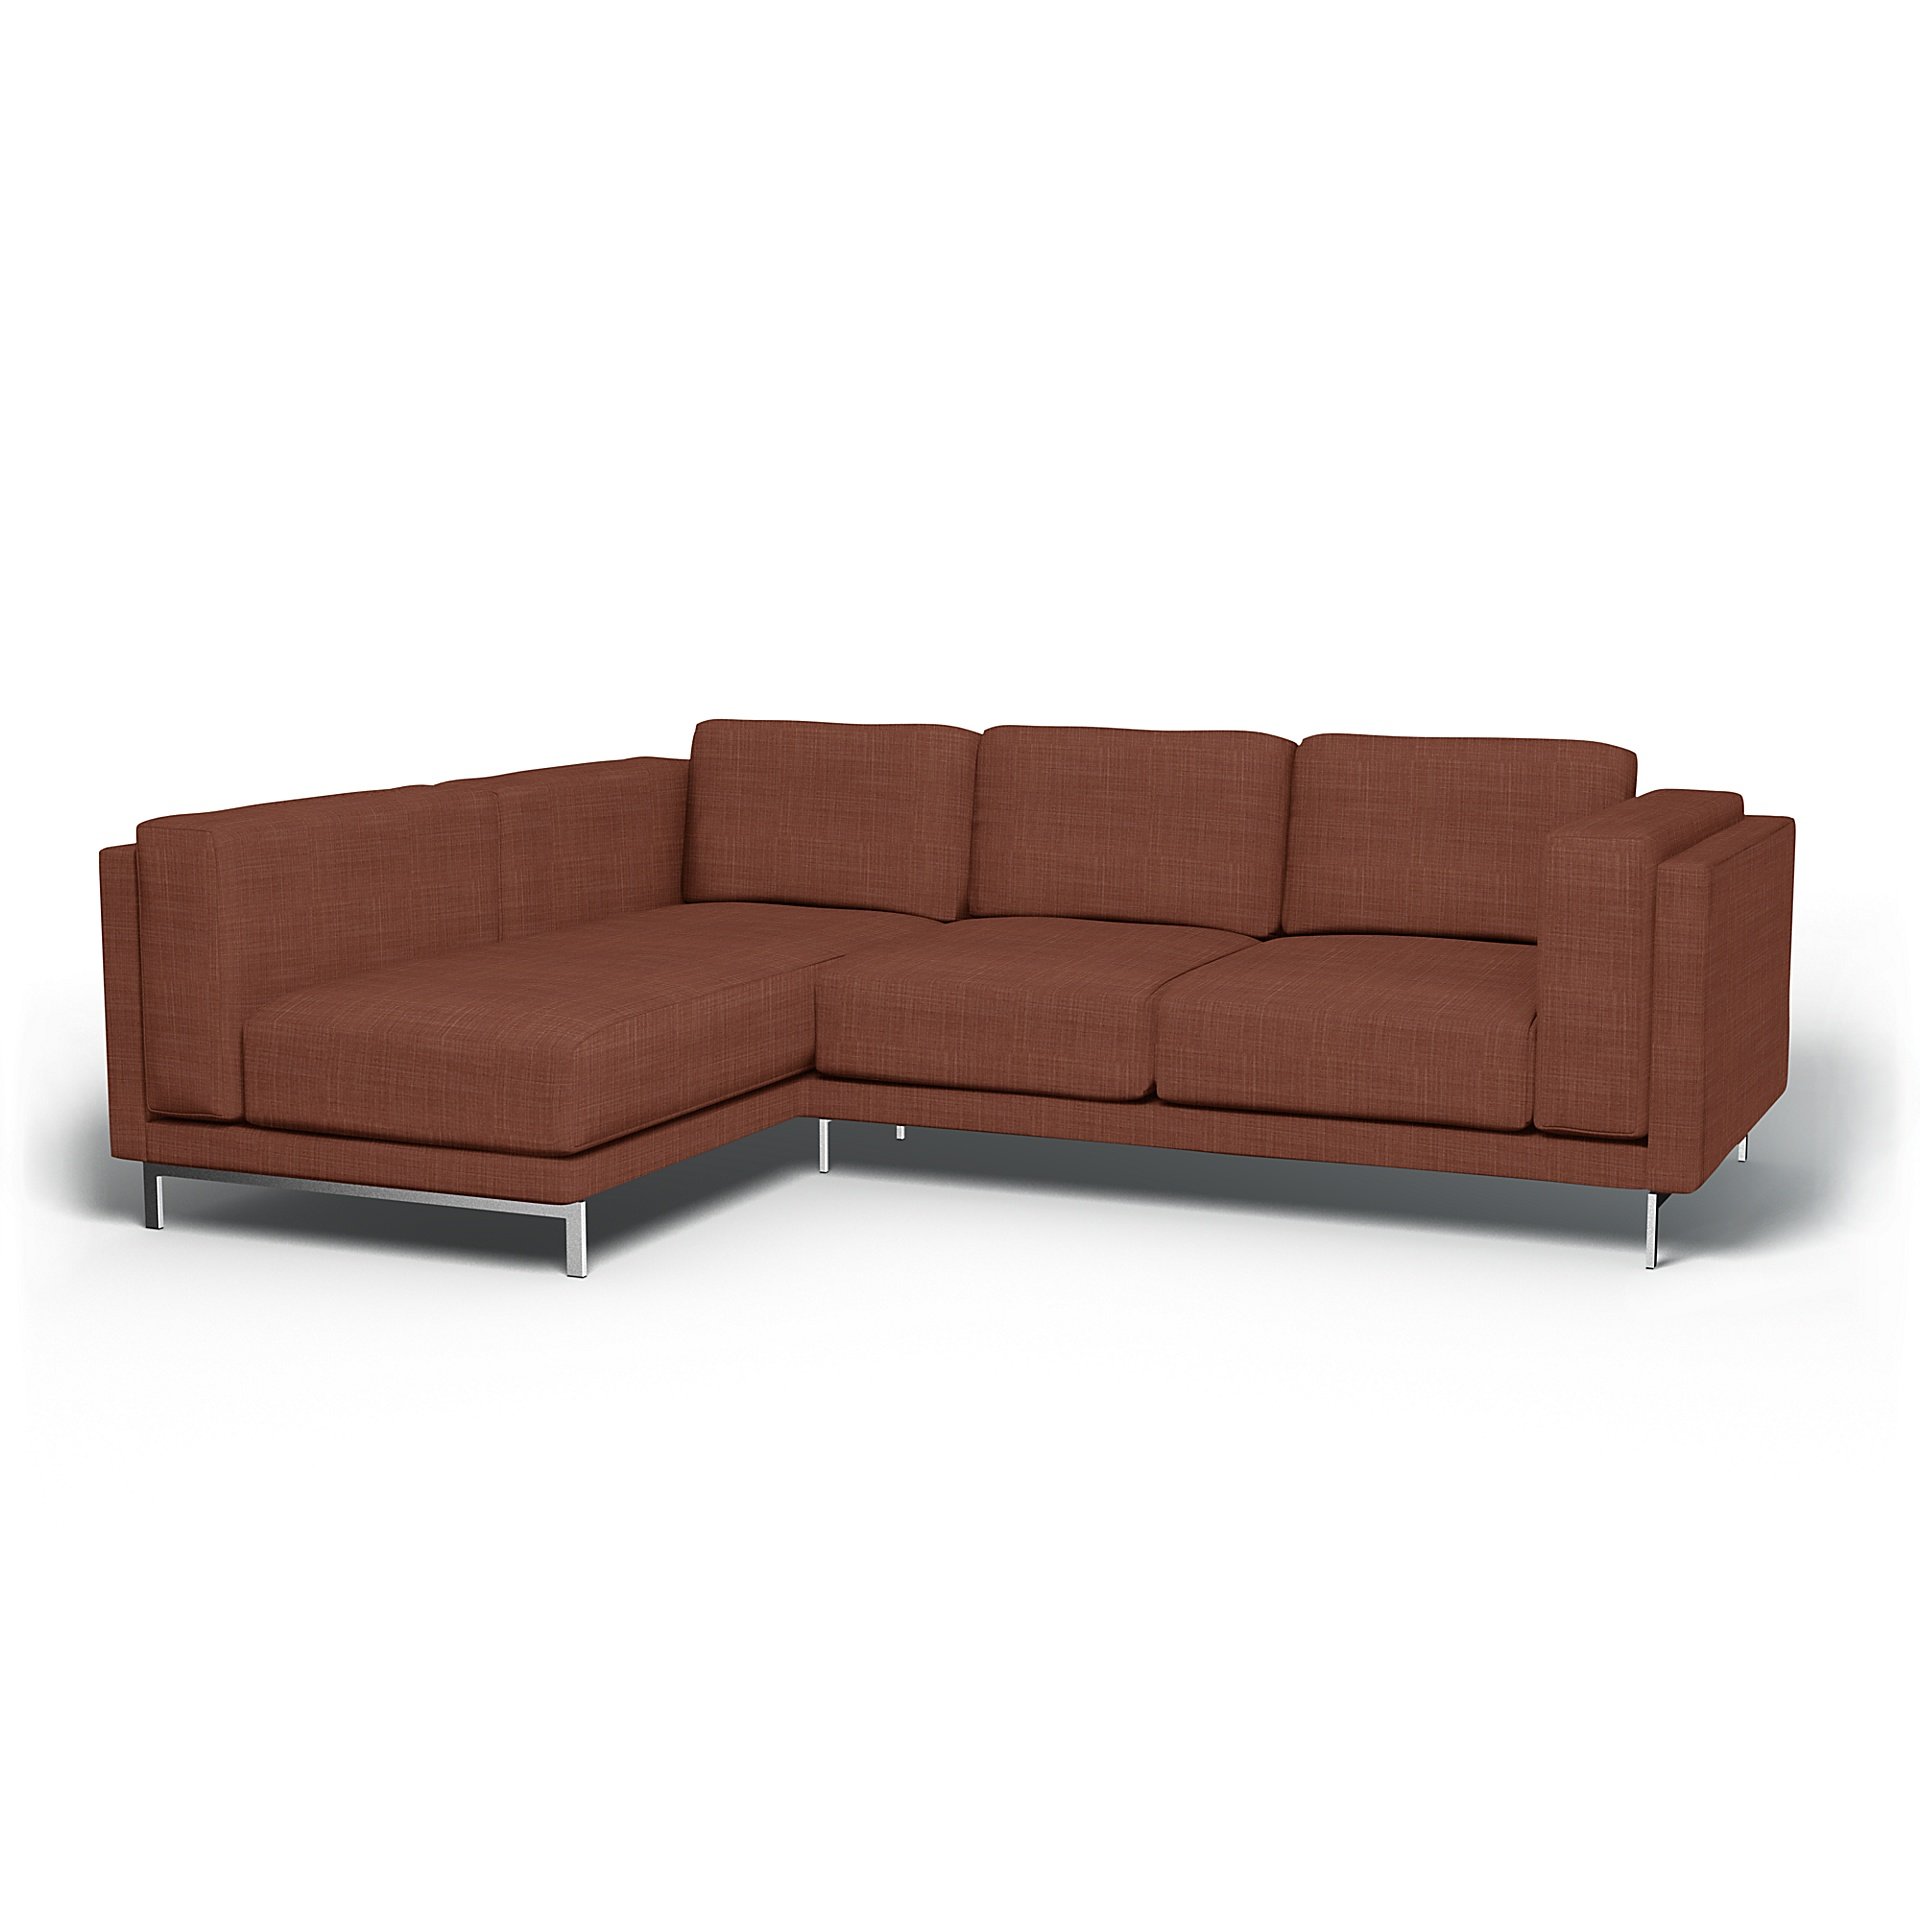 IKEA - Nockeby 3 Seater Sofa with Left Chaise Cover, Rust, Boucle & Texture - Bemz